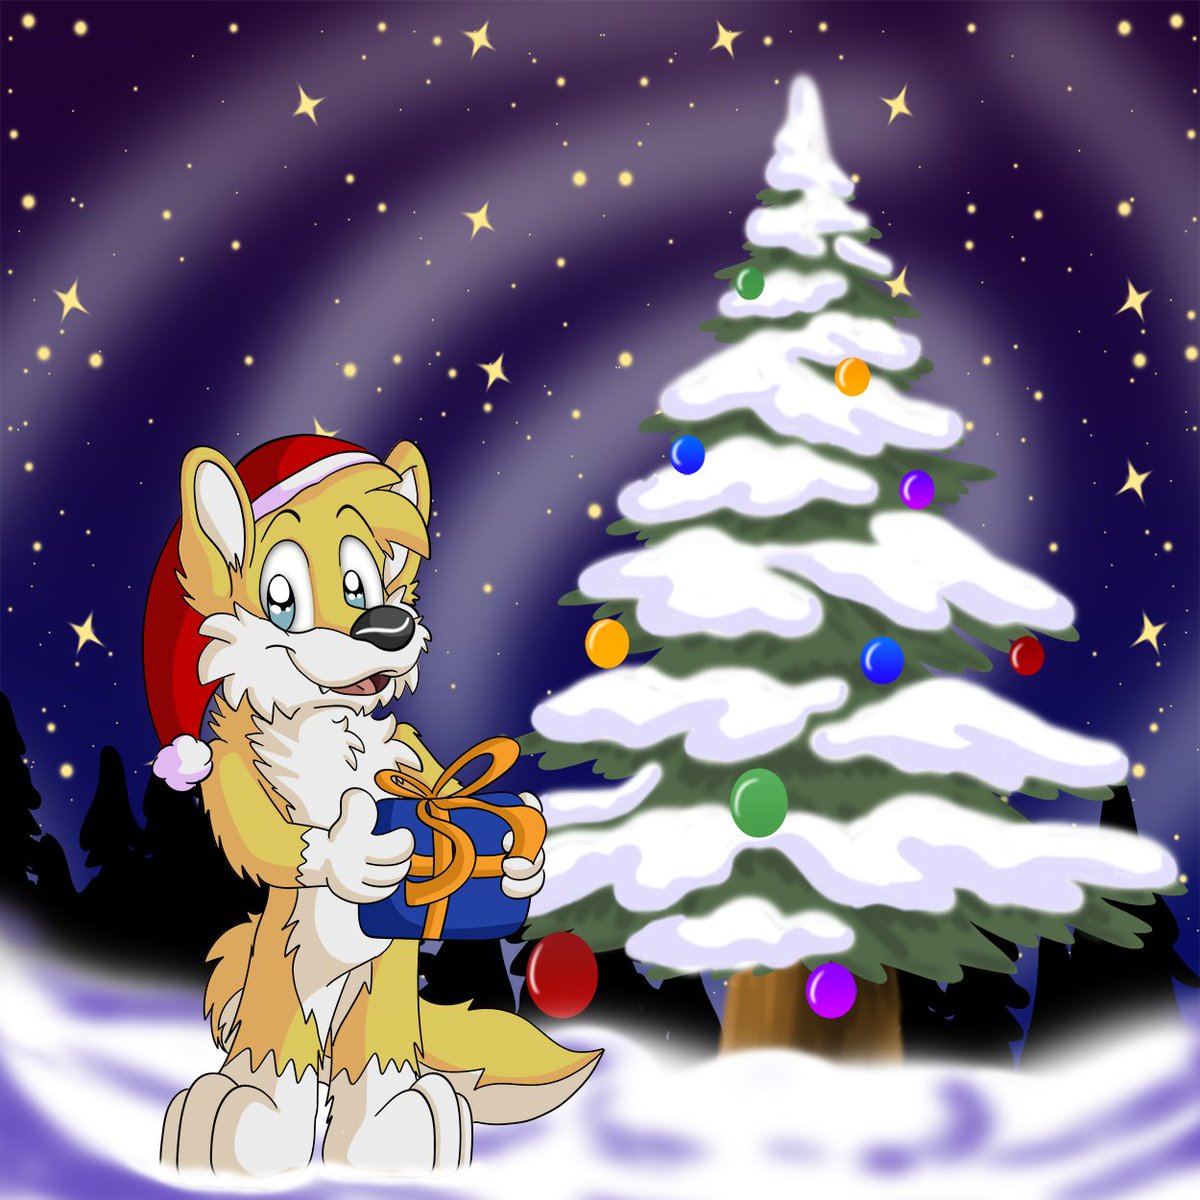 Nuuk Christmas Card

Happy holiday wishes from a happy polarwolf :D

Christmas card I did for @NuukPolarwolf